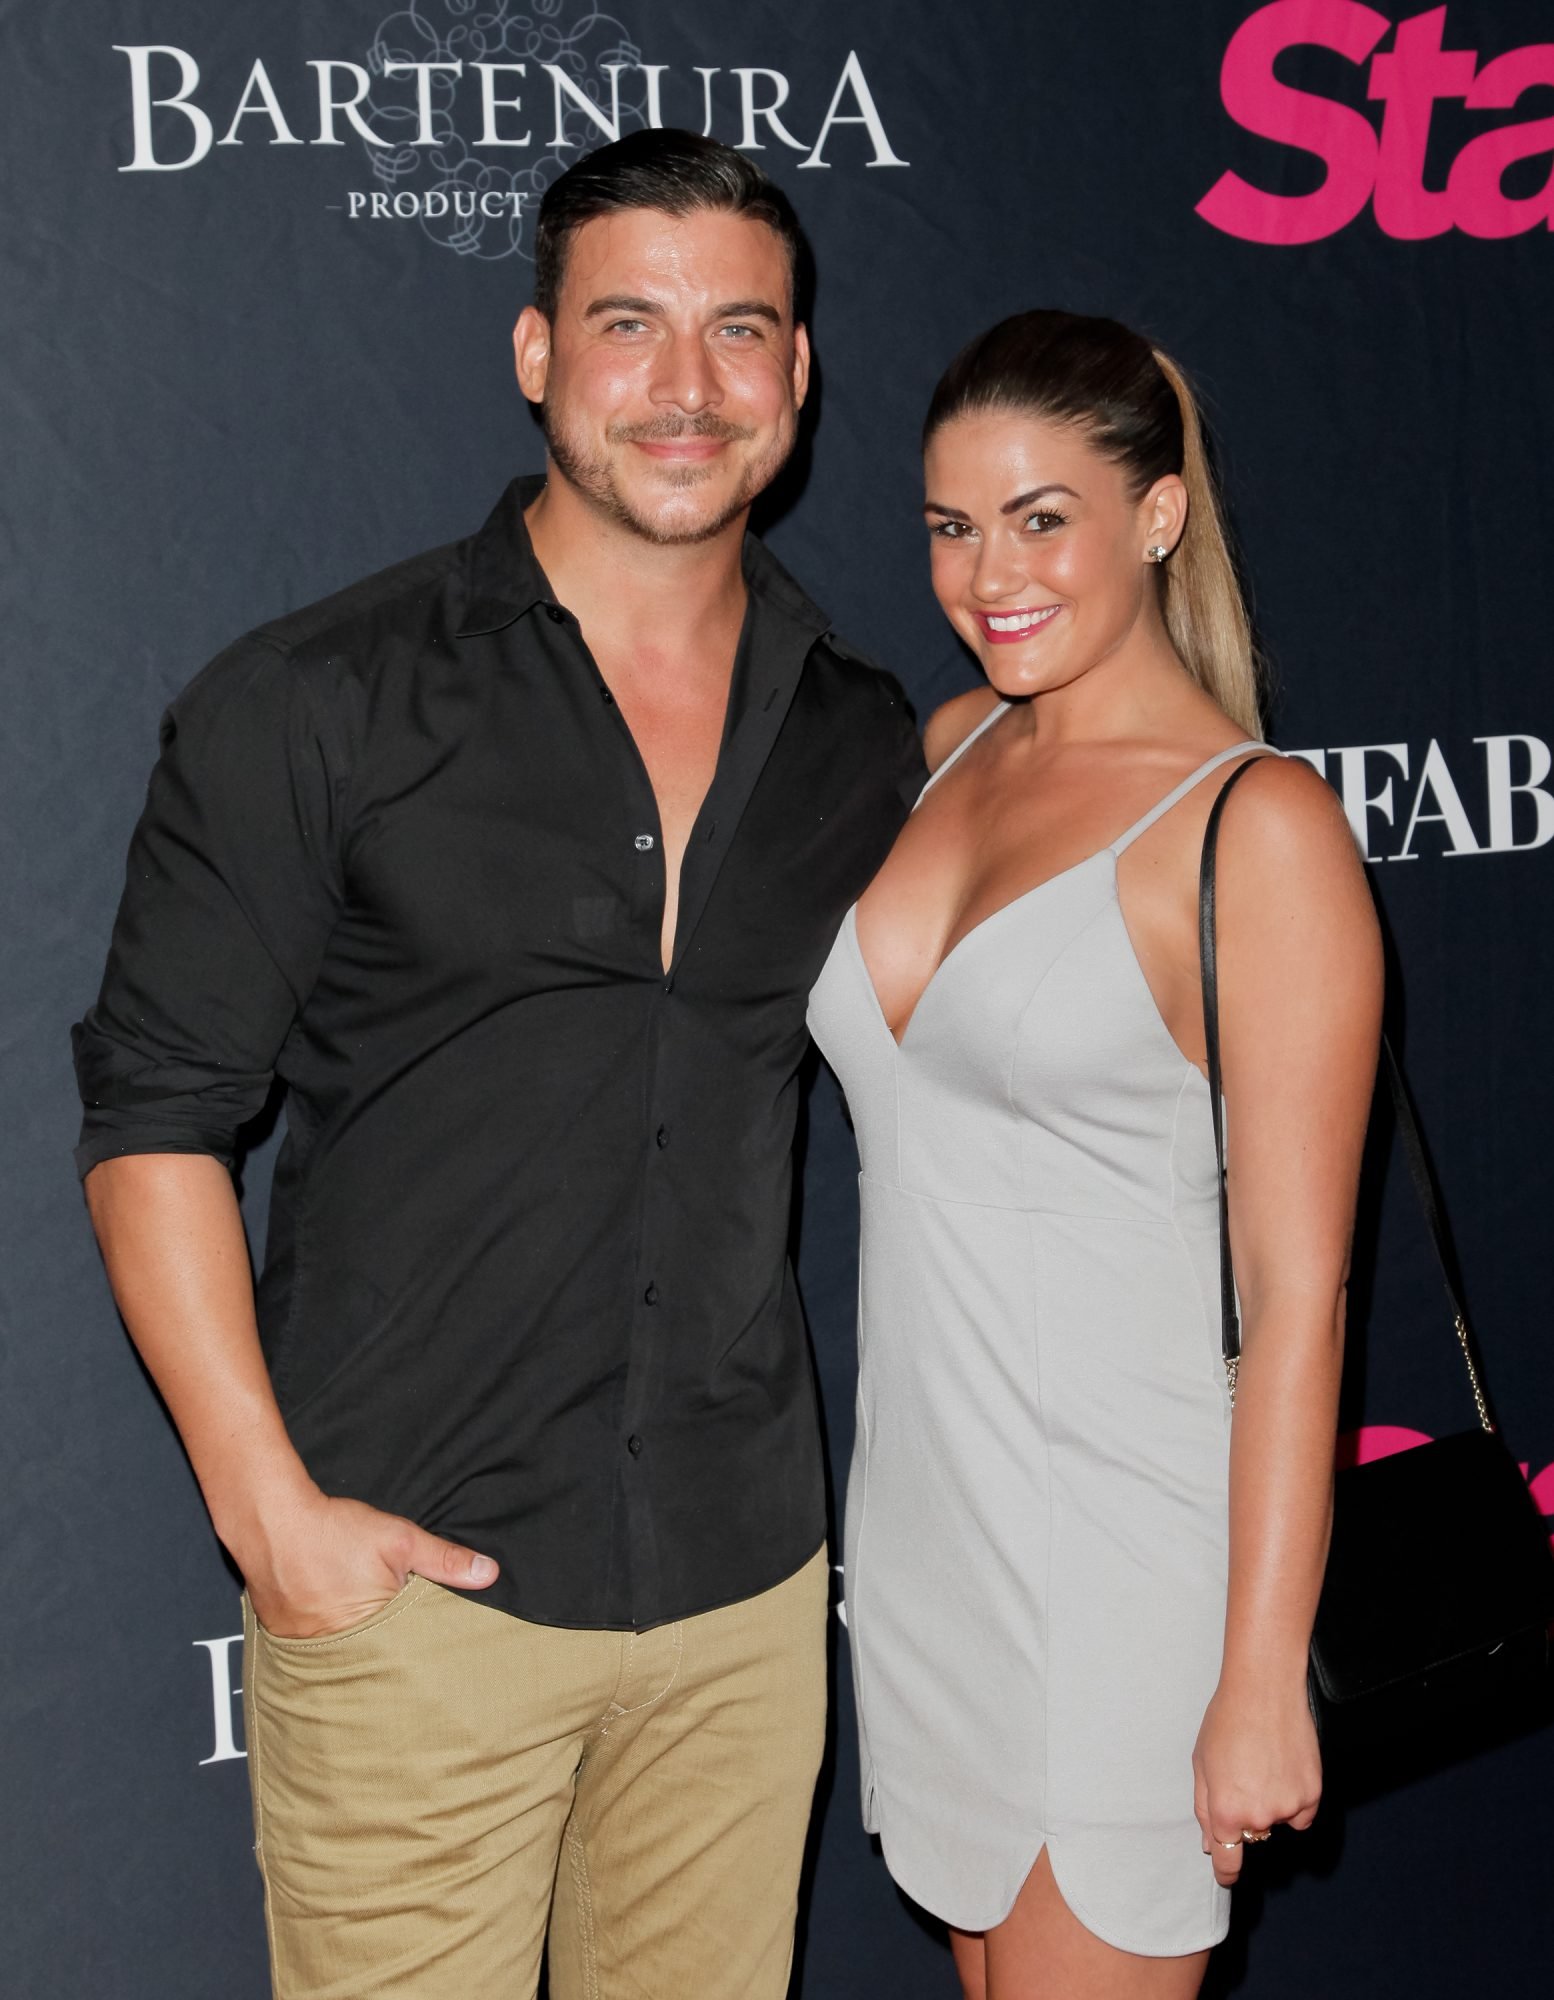 Cartwright and Jax Taylor, who wed in 2019, opened up about how much money they had spent in the early stages of their romance.